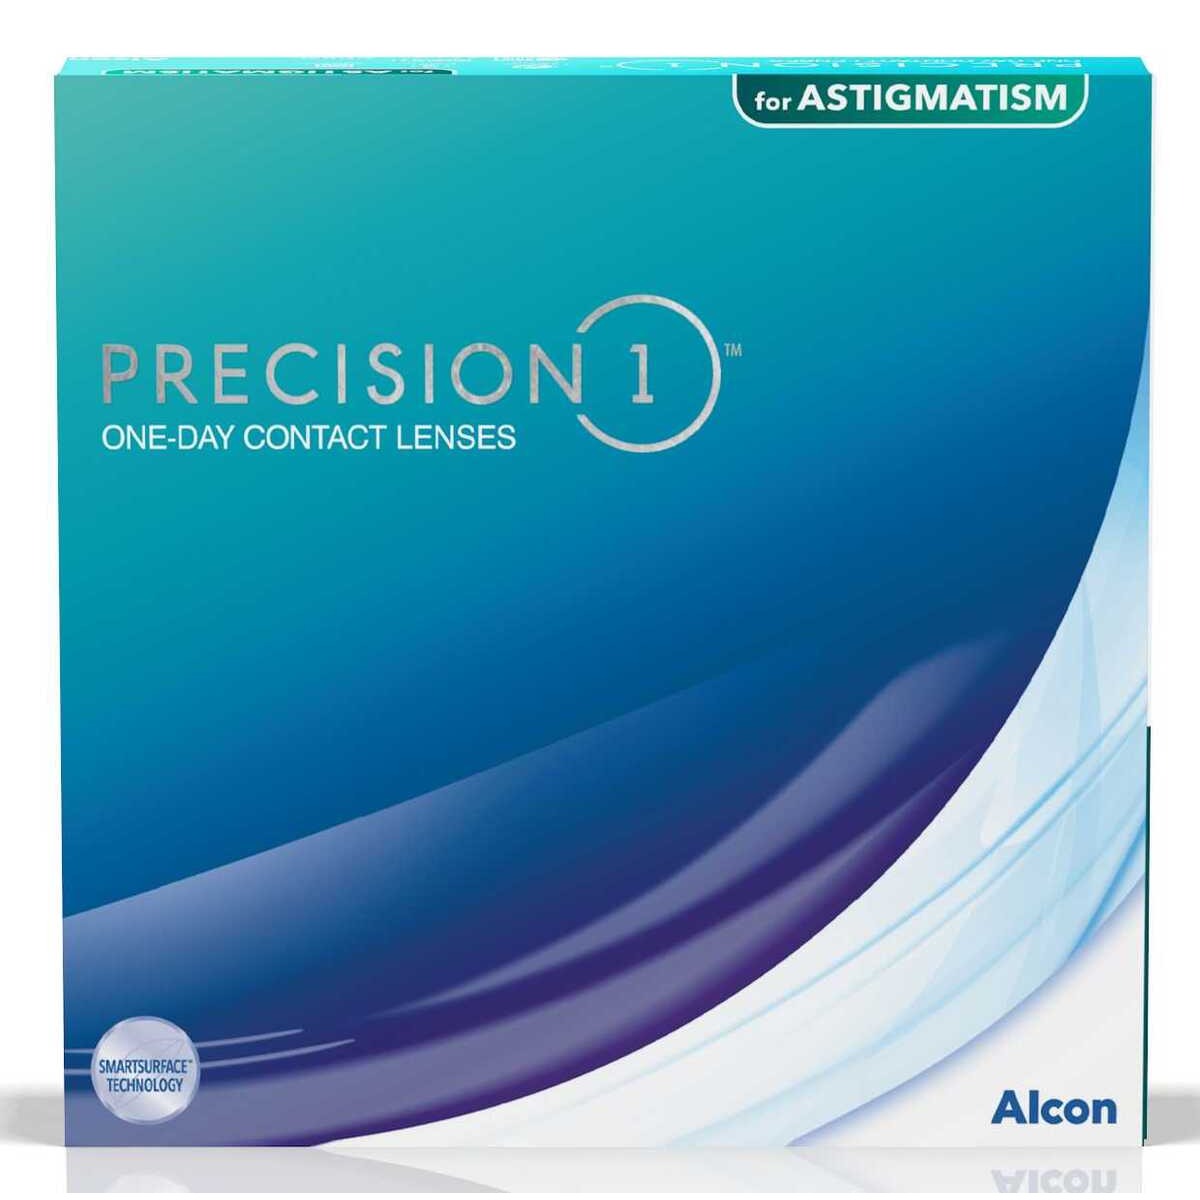 PREICISION 1 FOR ASTIGMATISM 90L